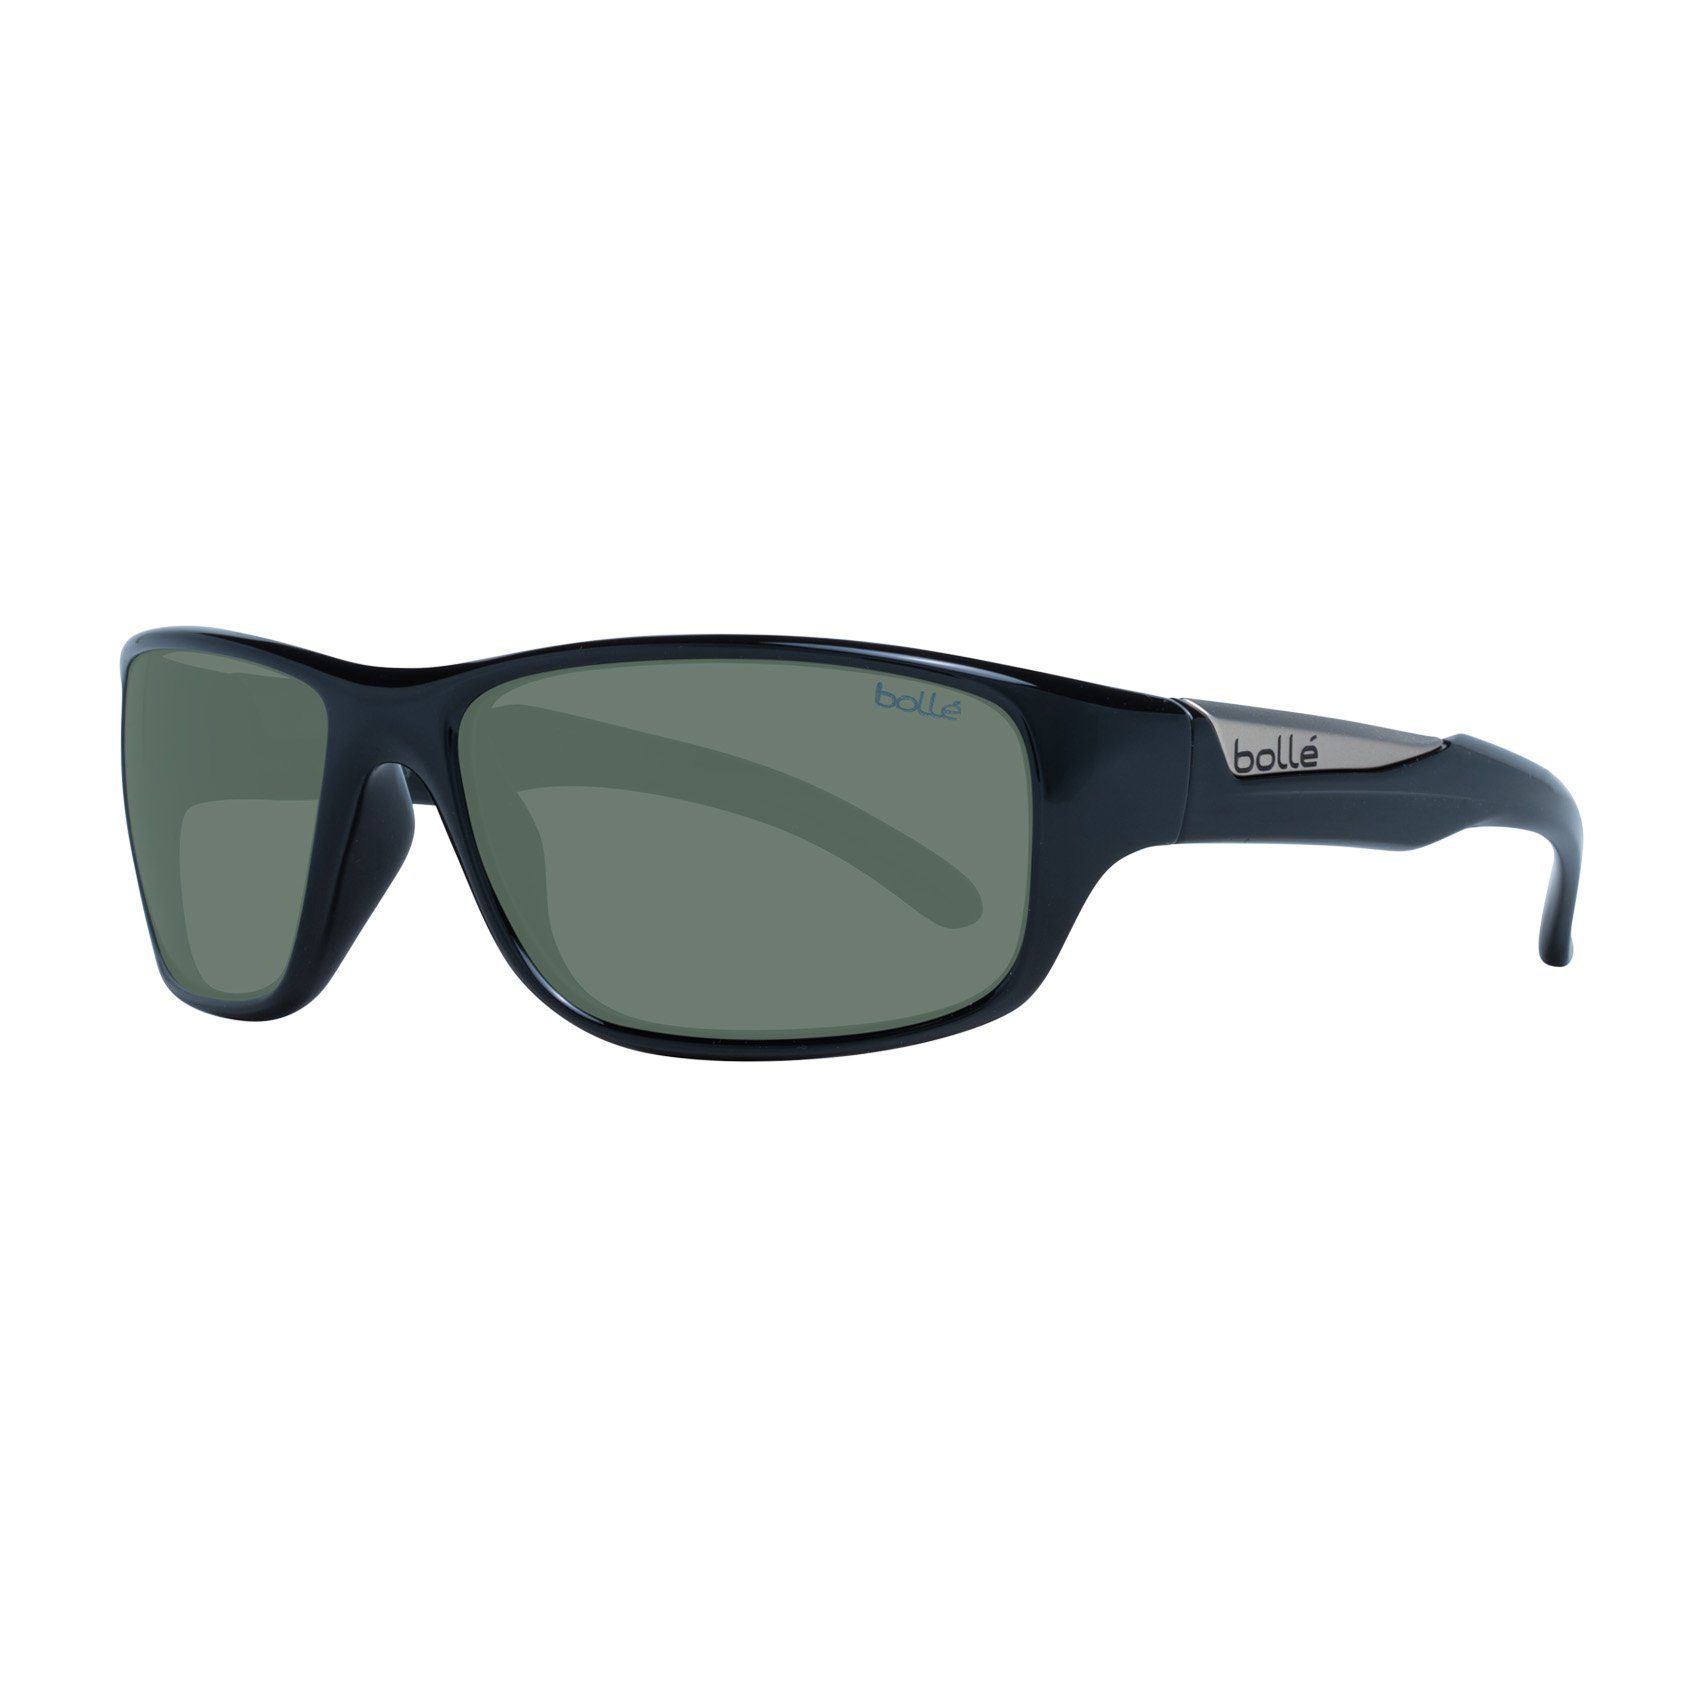 Bolle Sonnenbrille Shiny Black 11651 Vibe 59 Made in Italy | Sonnenbrillen